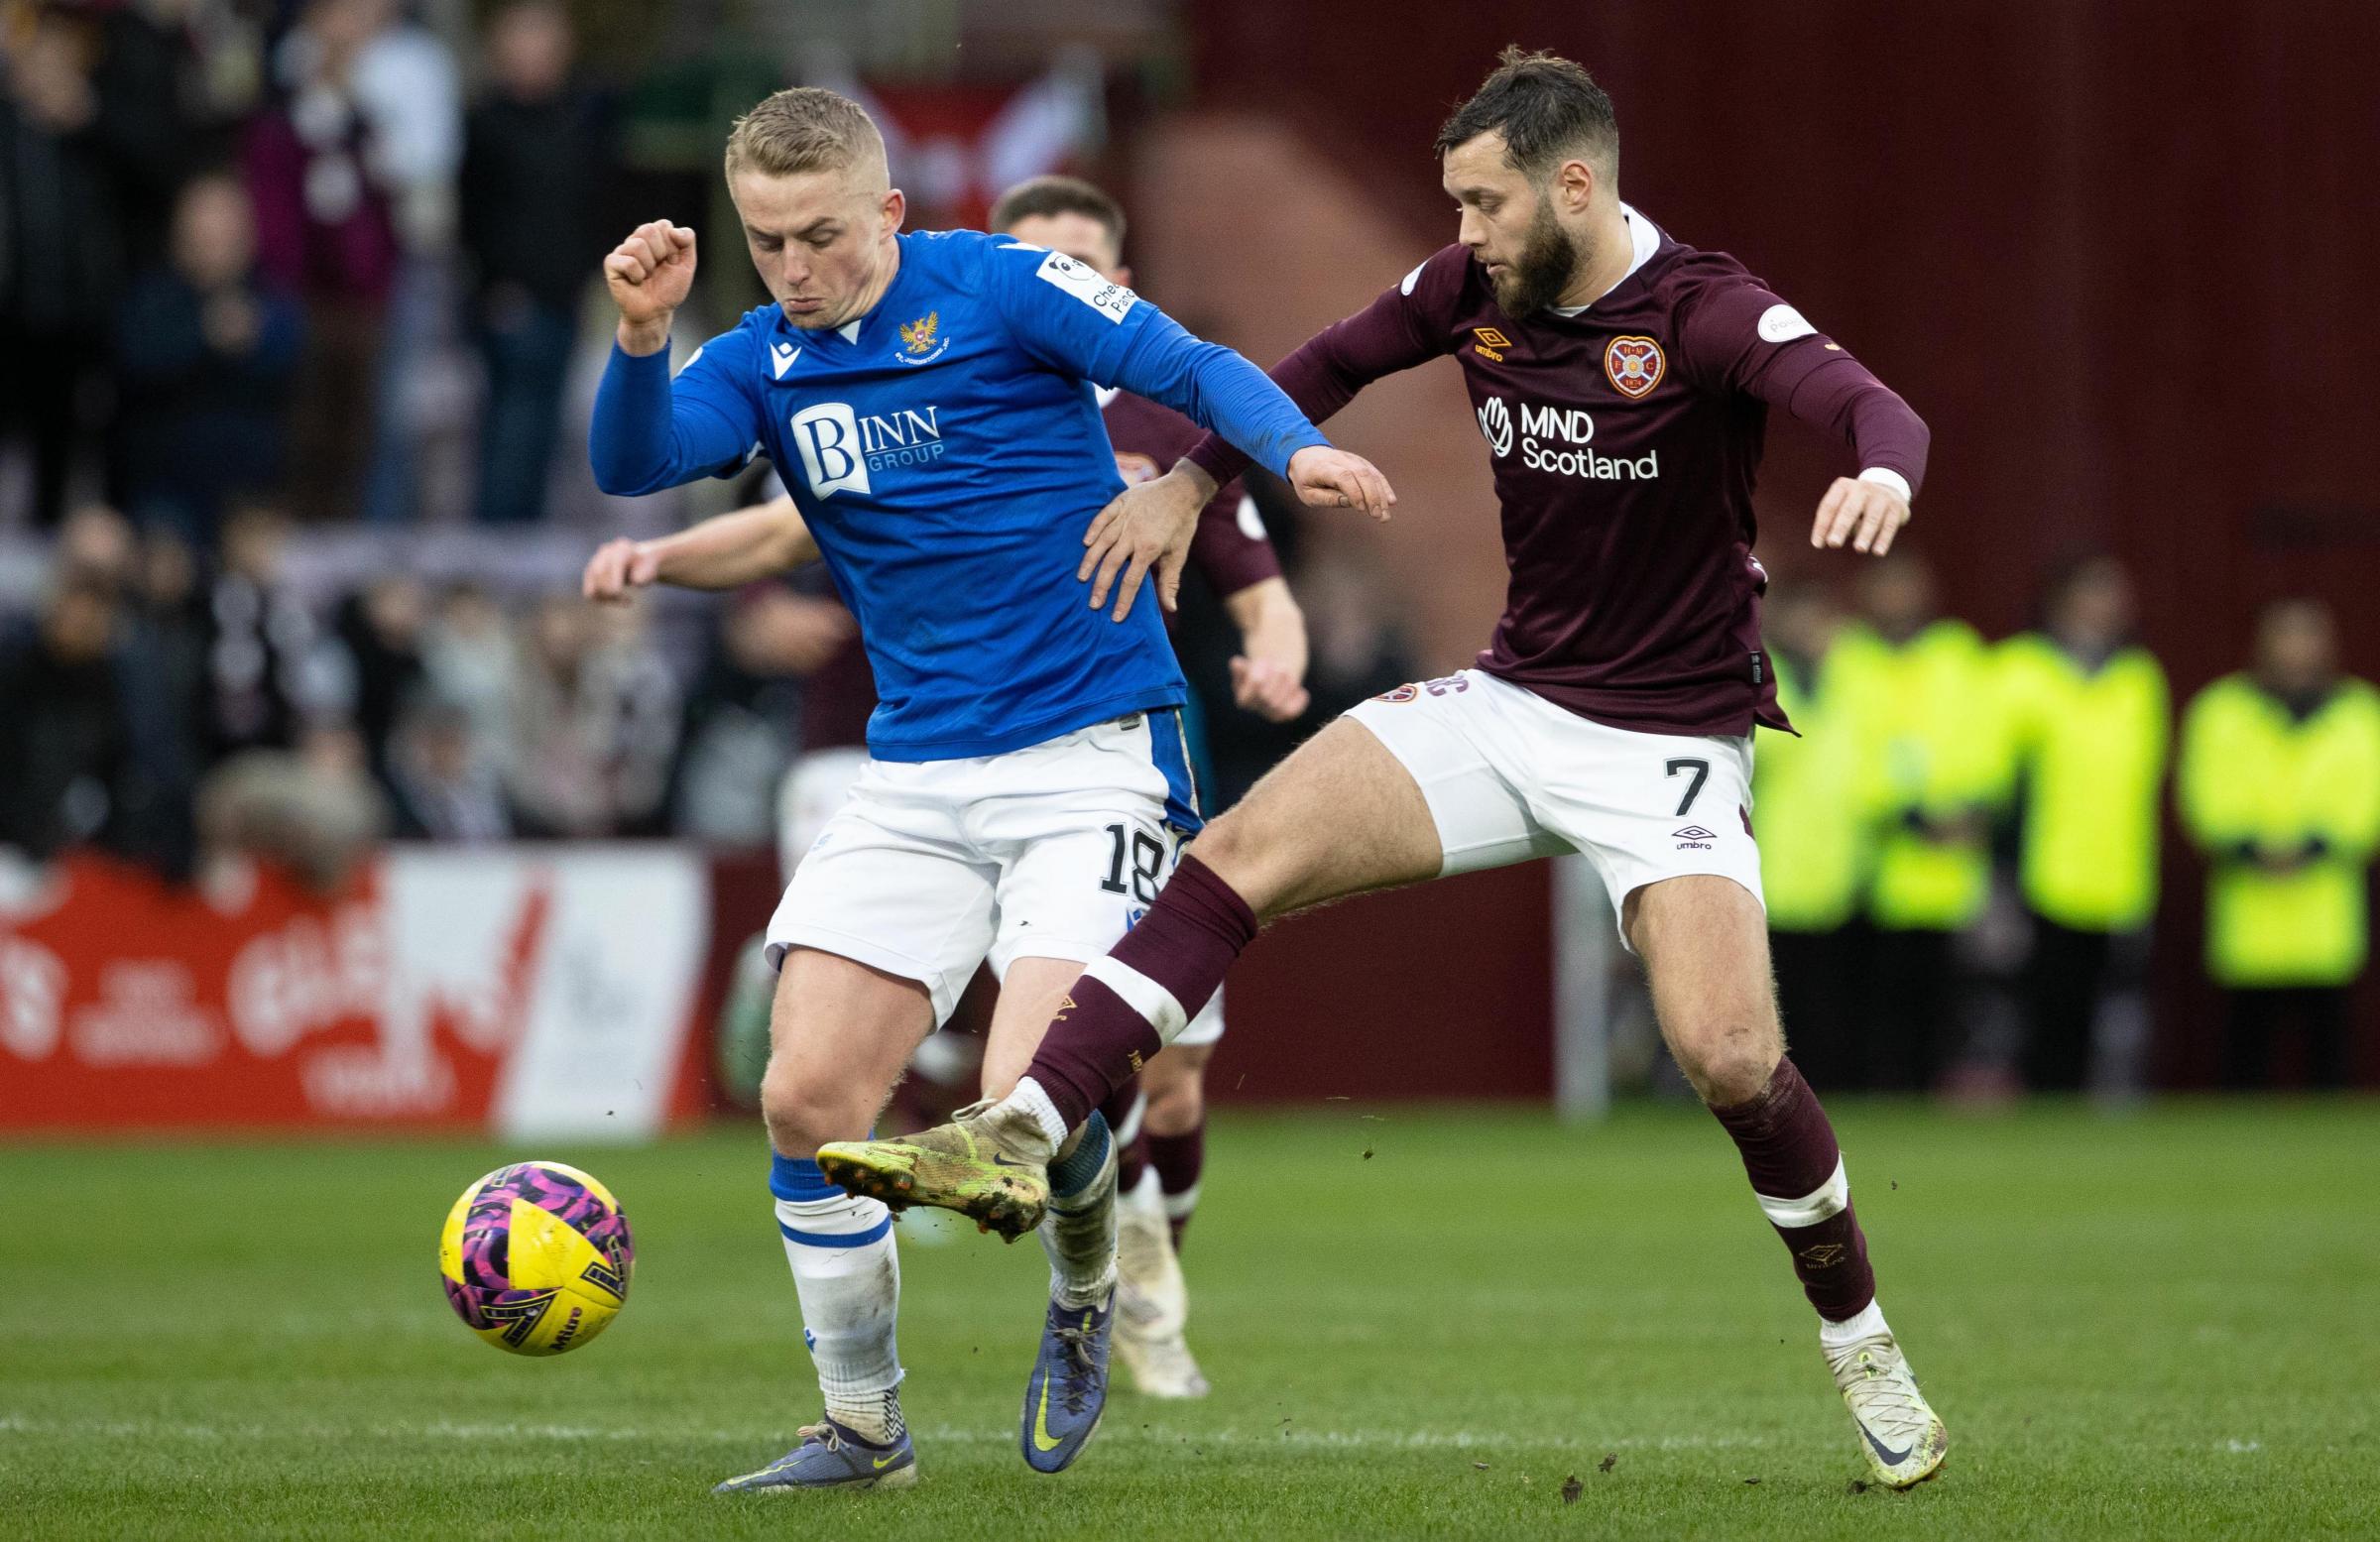 Hearts to face St Johnstone in bounce game with no Premiership games